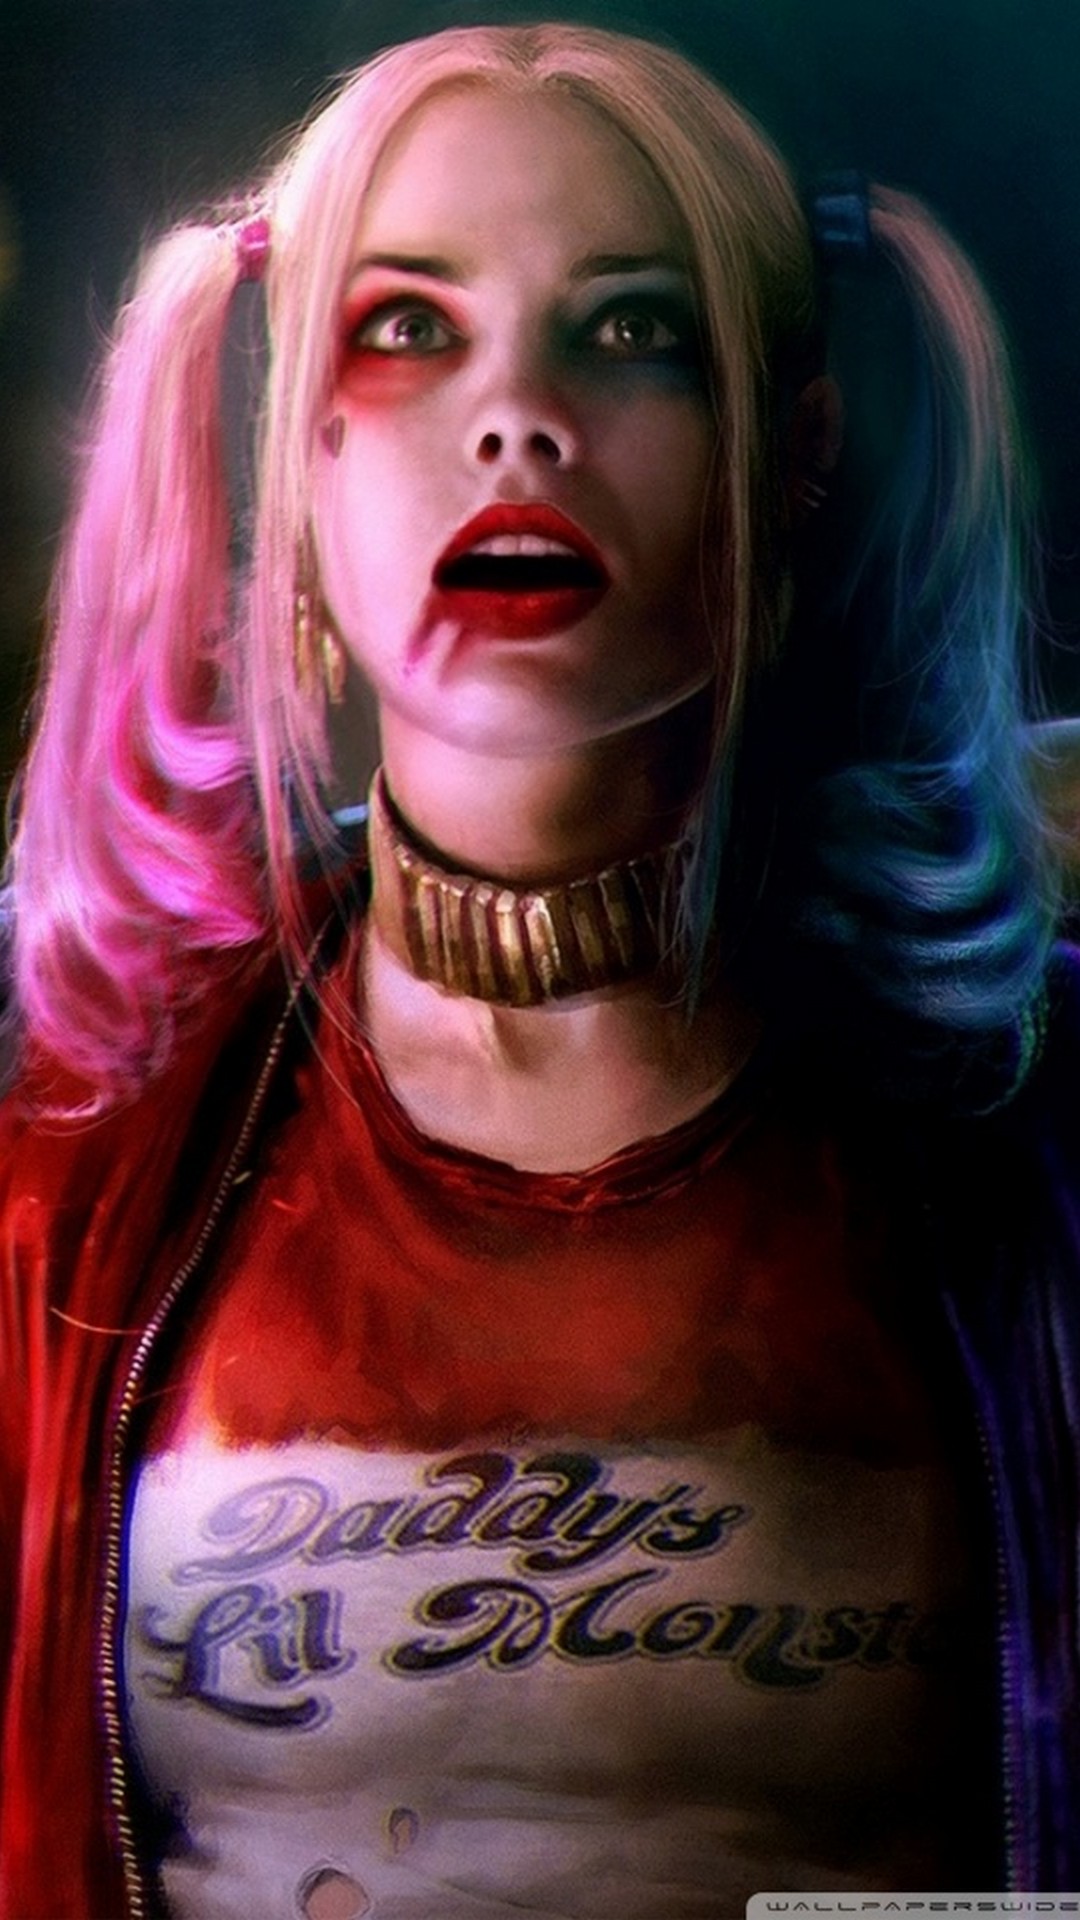 Harley Quinn Costume iPhone Wallpaper with image resolution 1080x1920 pixel. You can make this wallpaper for your iPhone 5, 6, 7, 8, X backgrounds, Mobile Screensaver, or iPad Lock Screen